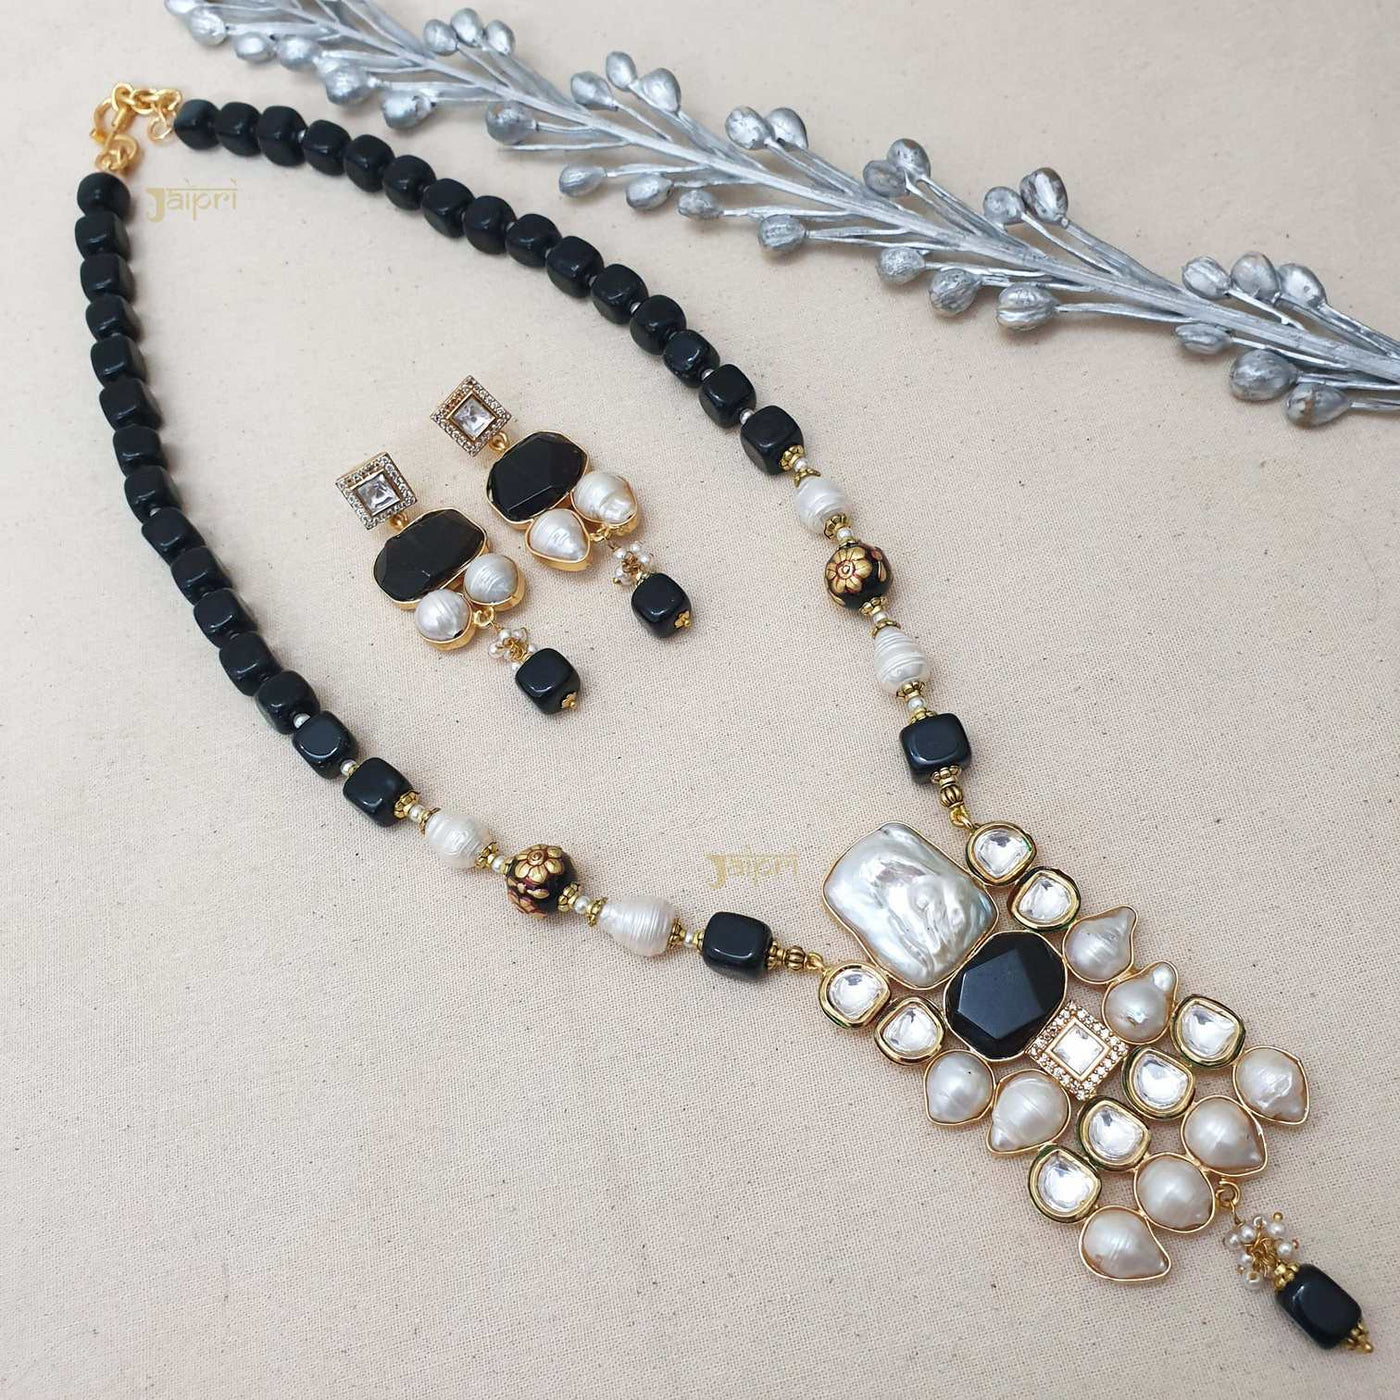 Black & White Beads Stone Fusion Pendant With Earrings